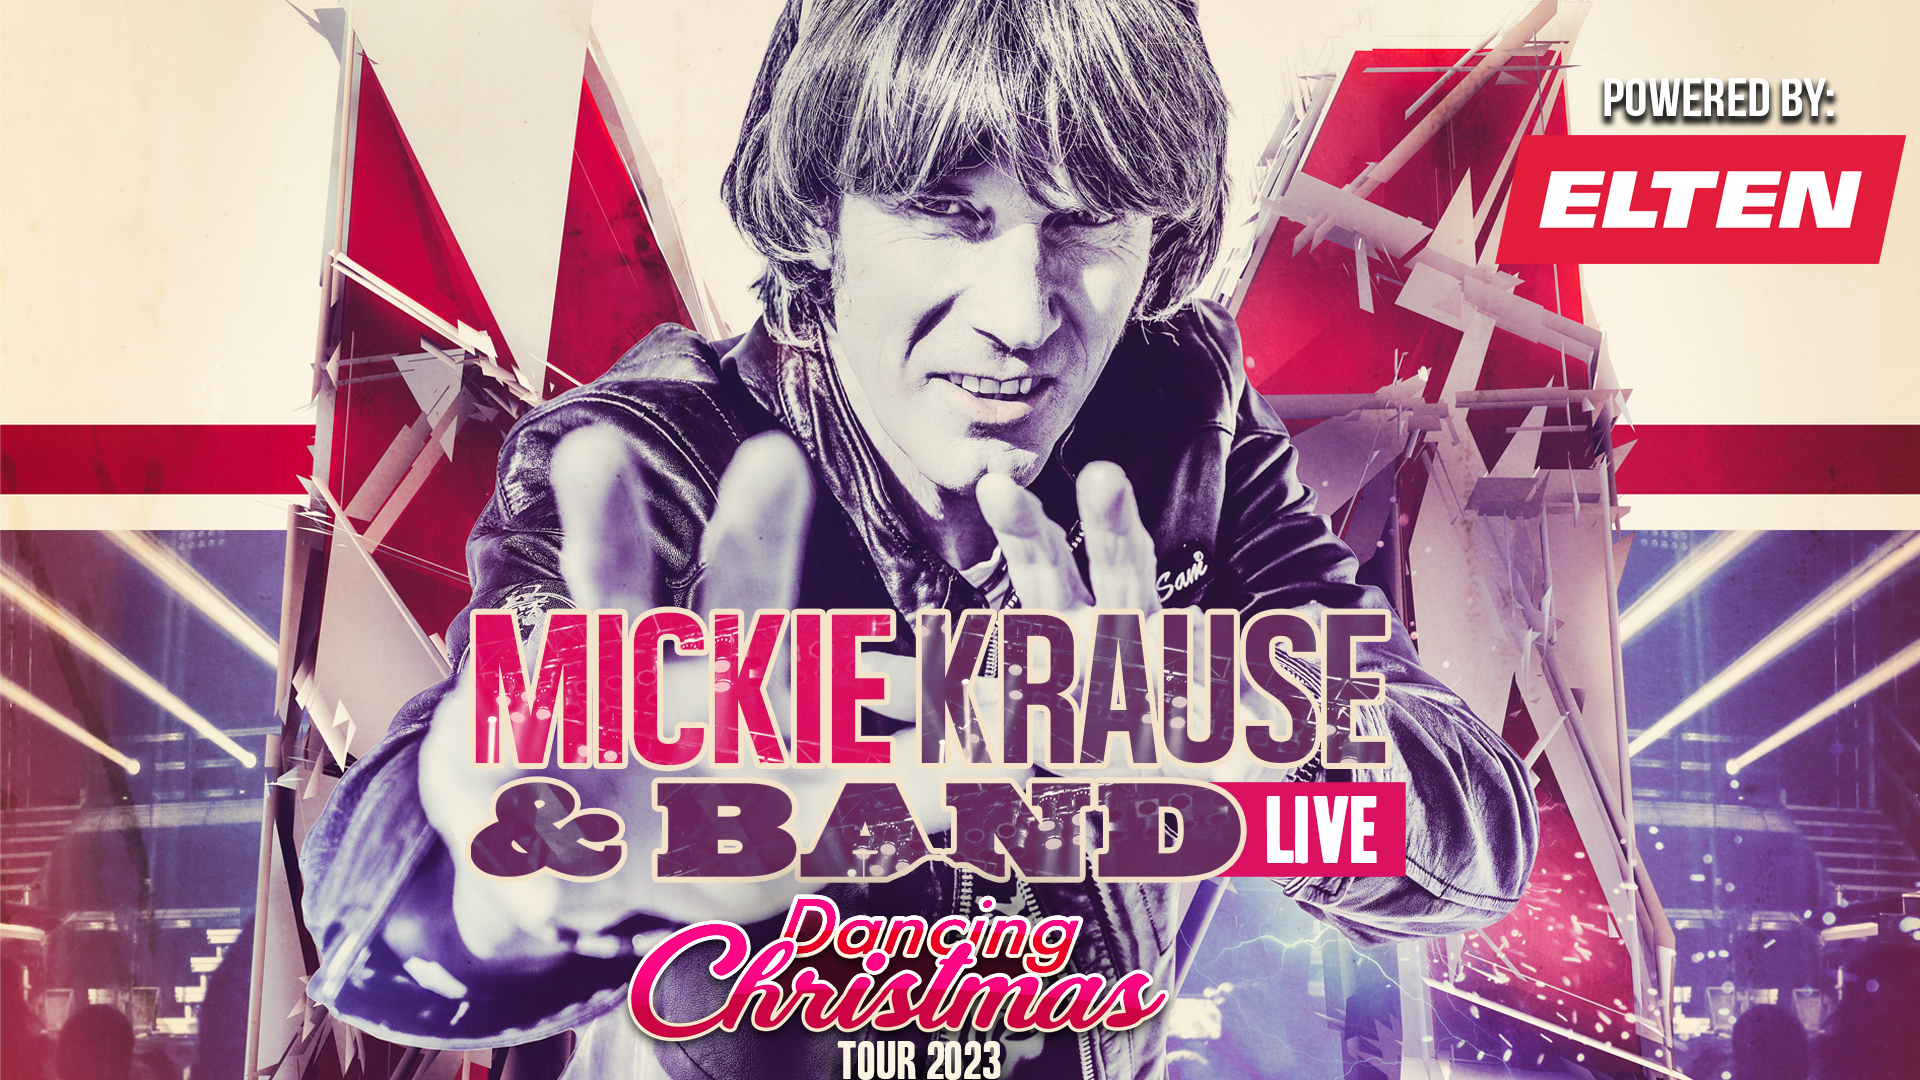 MICKIE KRAUSE – Christmas-DANCING-Tour 2023 powered by Elten